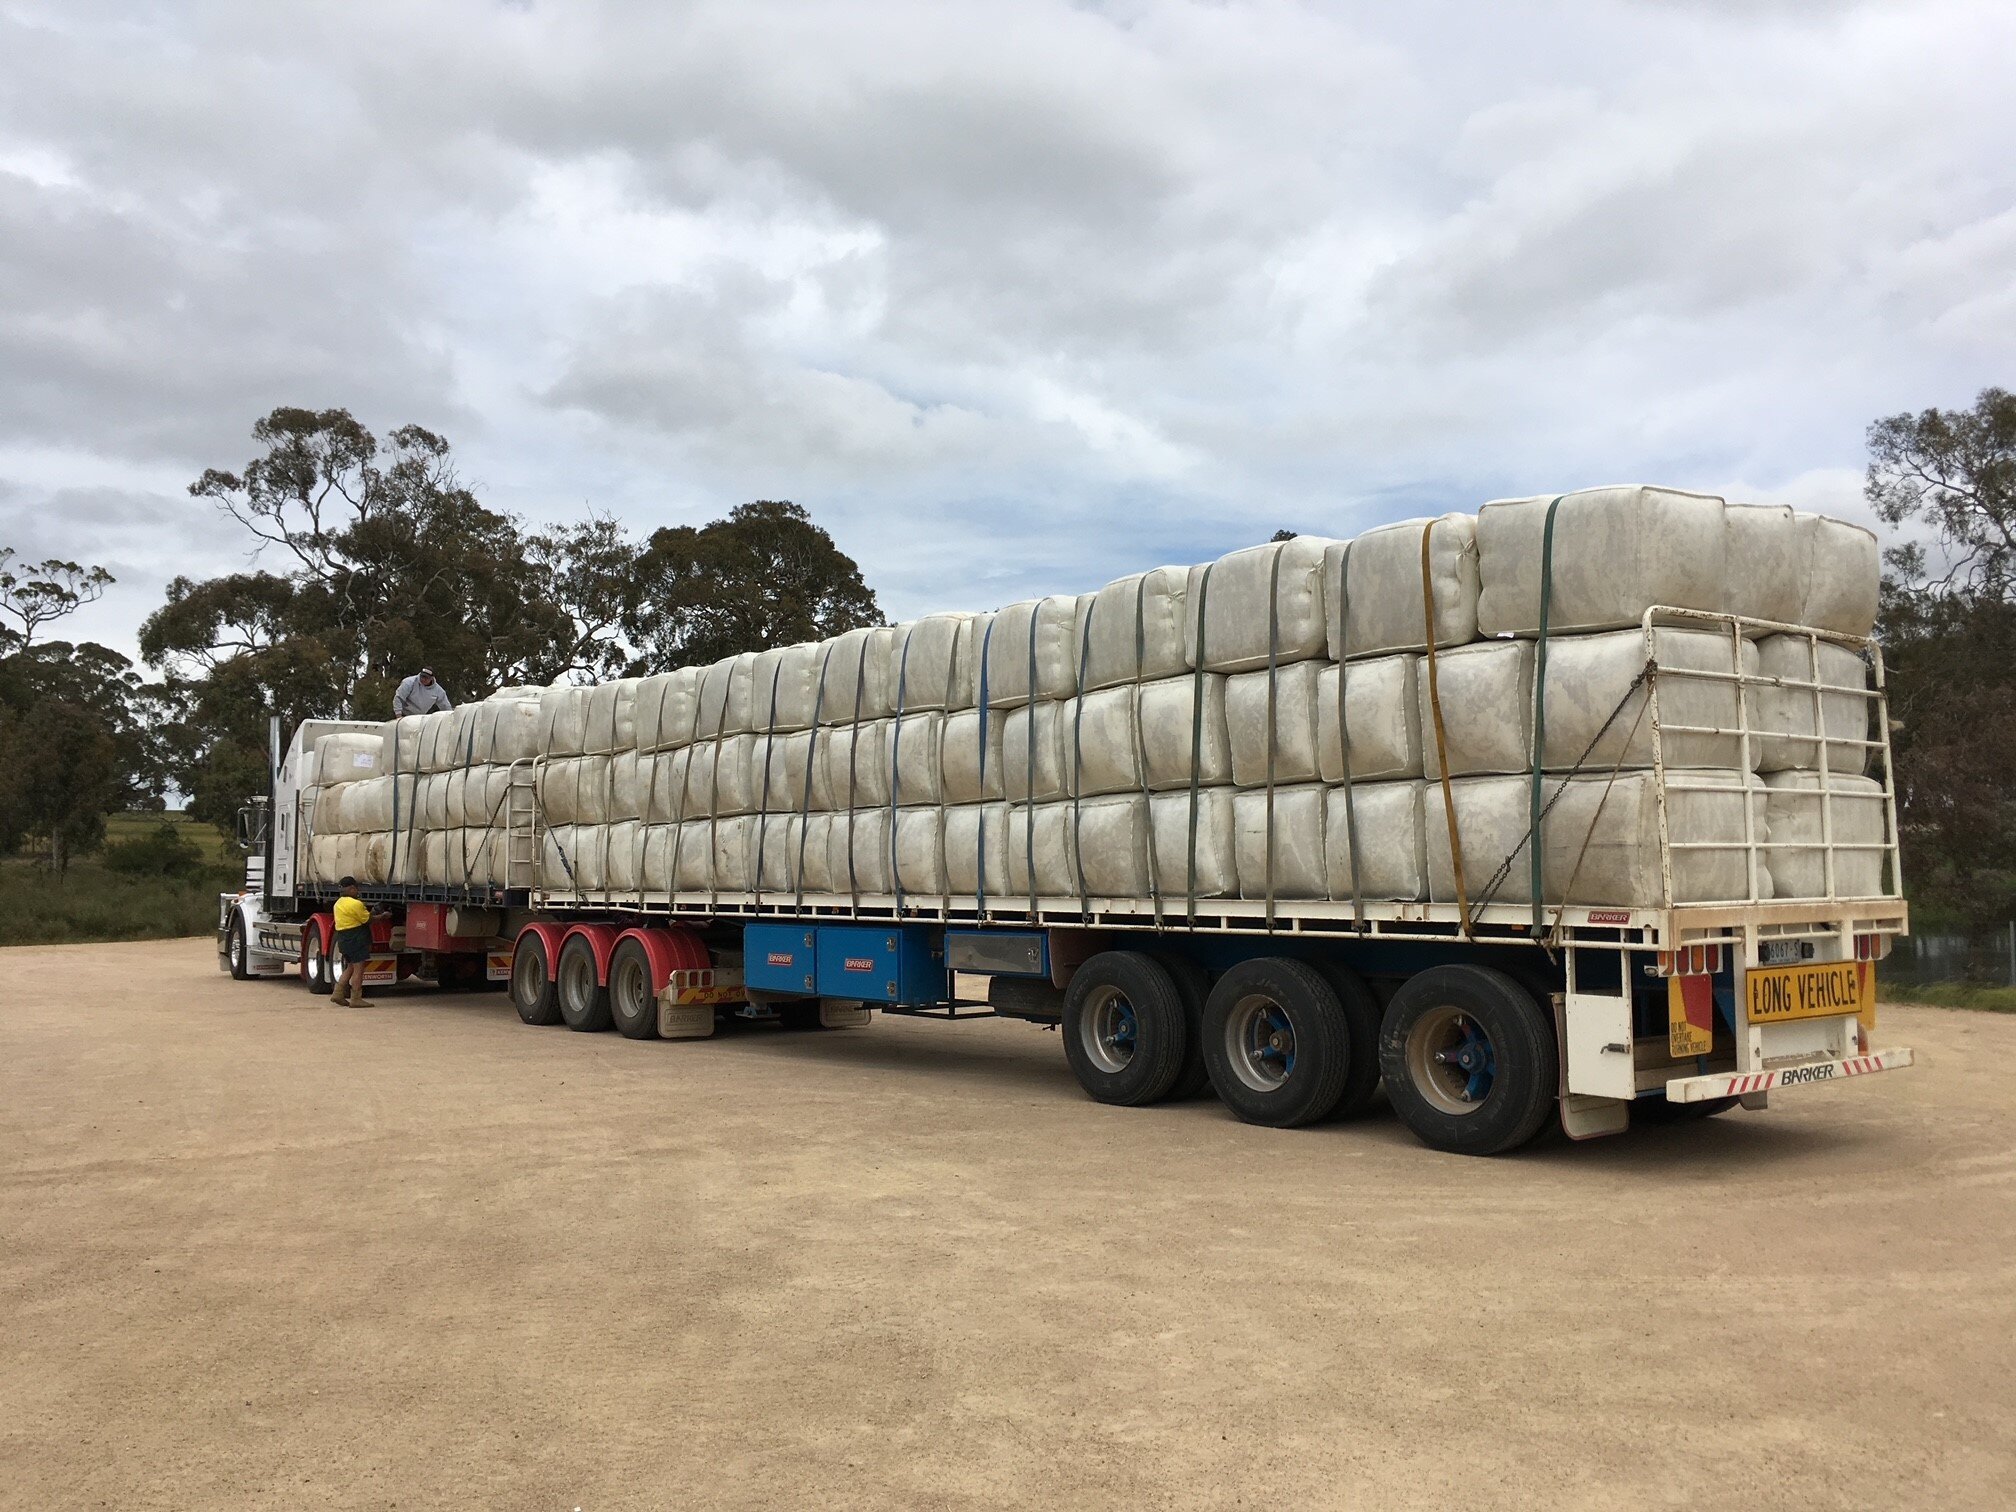 Wool transport to Melbourne store